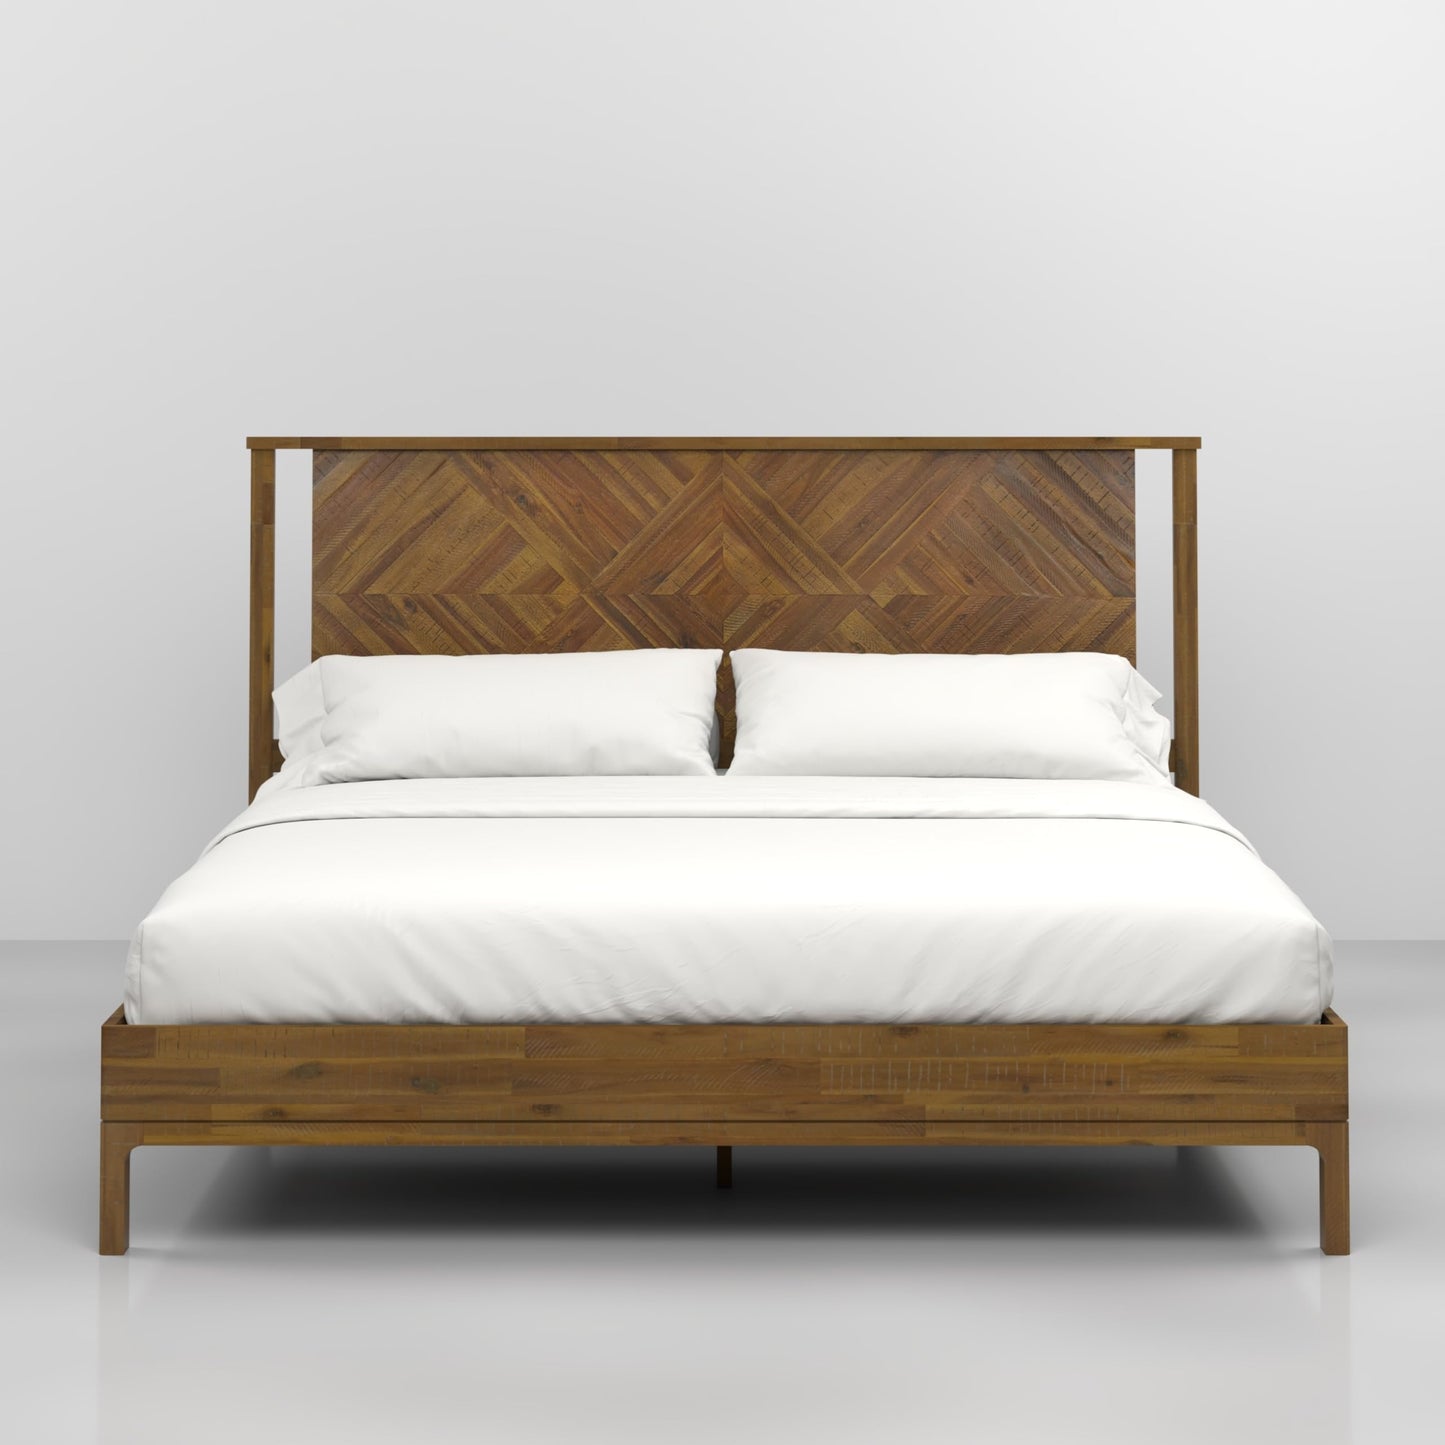 Bme Ethan King Platform Bed Frame with Headboard - Mid Century & Modern Rustic Style - Solid Acacia Wood - No Box Spring Needed - 12 Strong Wood Slat